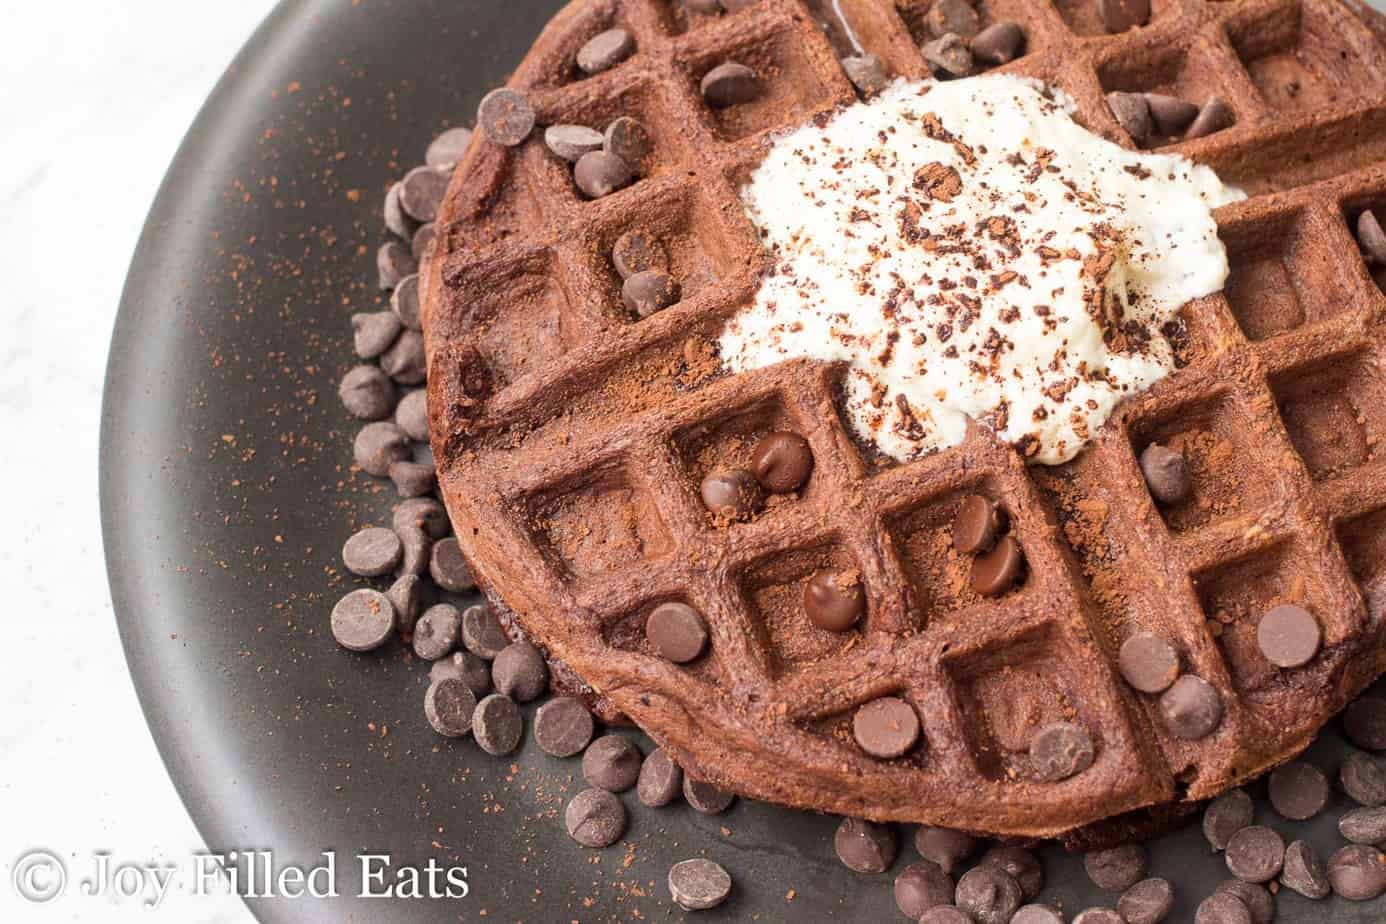 chocolate chocolate chip waffle surrounded by chocolate chips and topped with whipped cream on a black plate